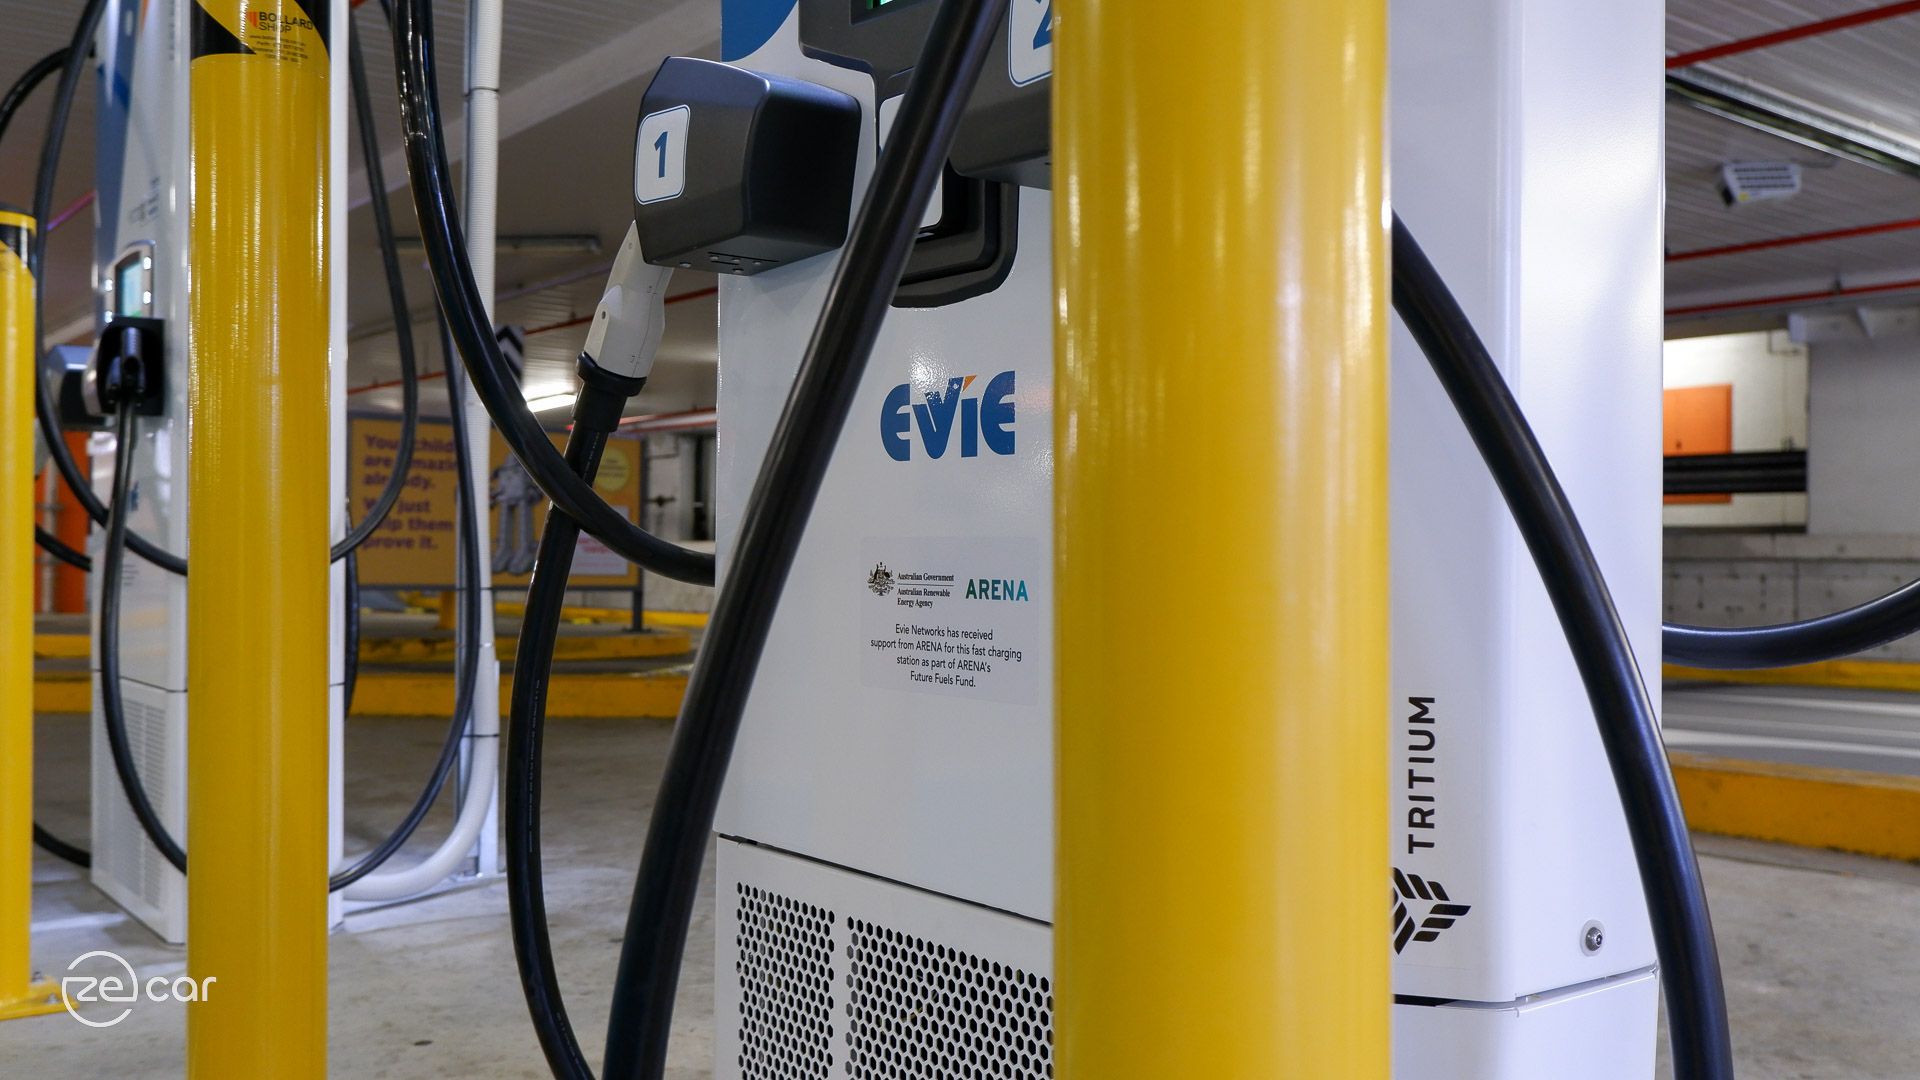 Evie Networks, Tritium and ARENA logos on EV charger